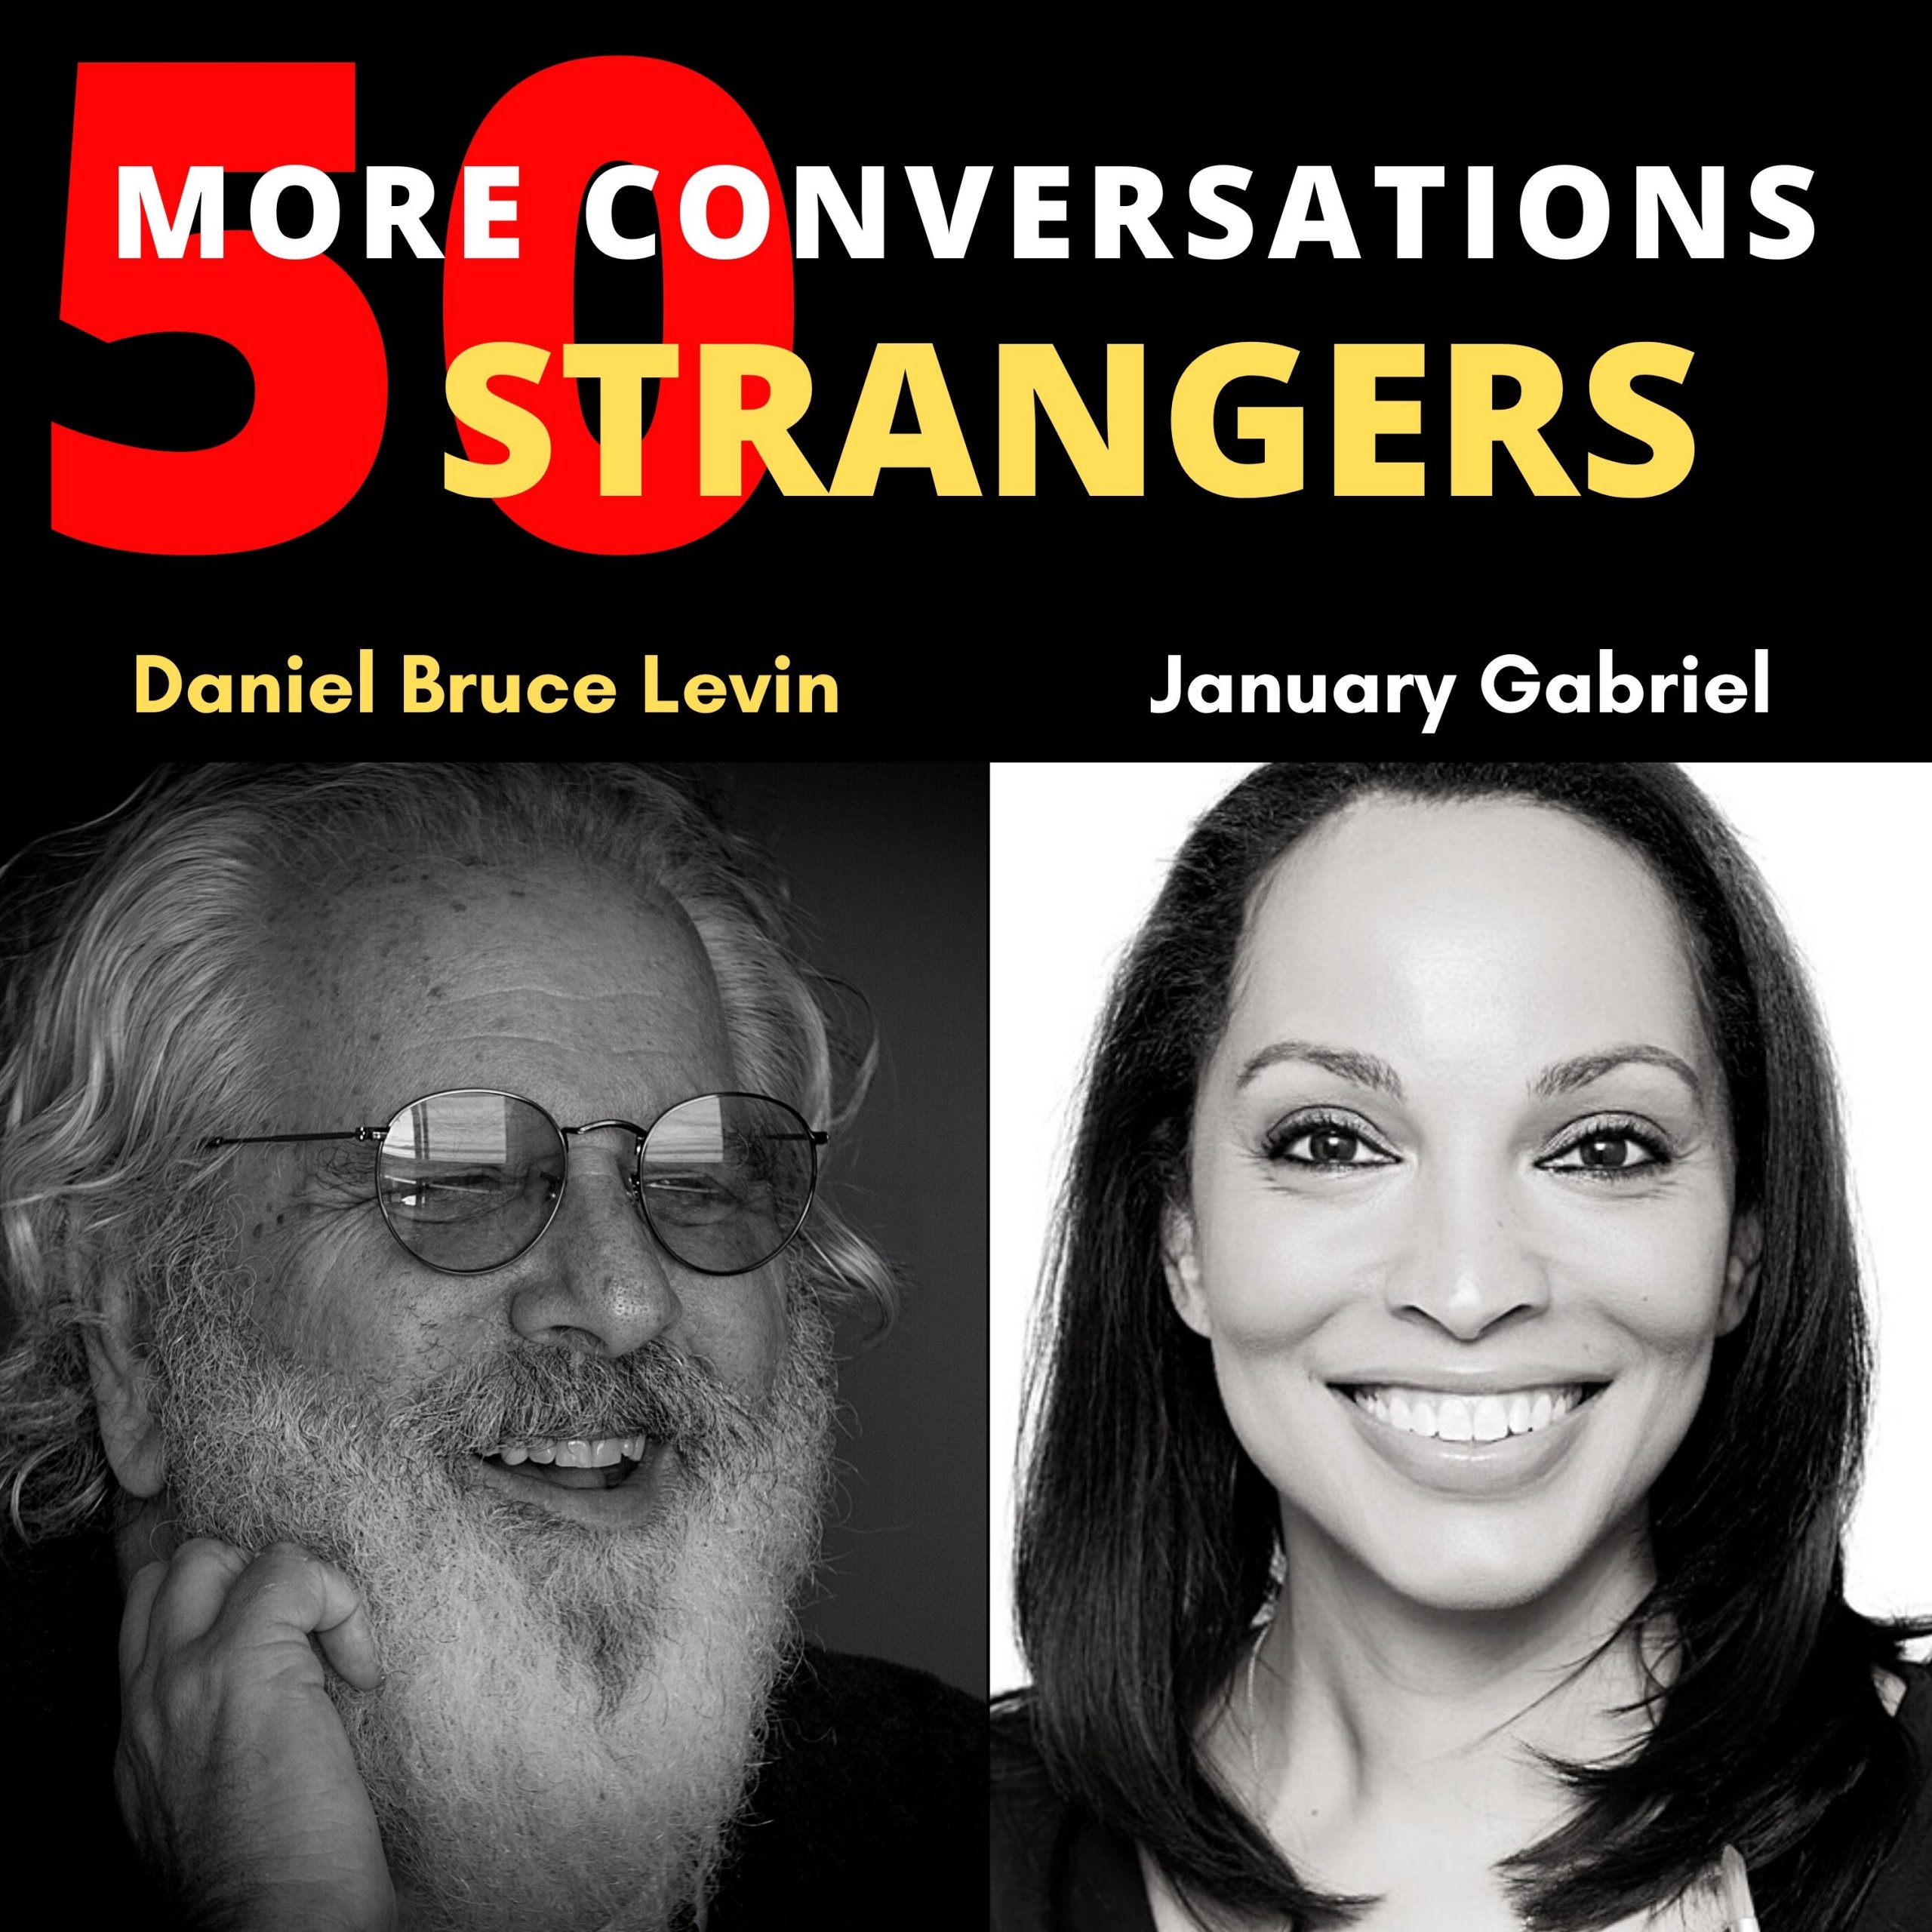 5o More Conversations with 50 More Strangers with January Gabriel